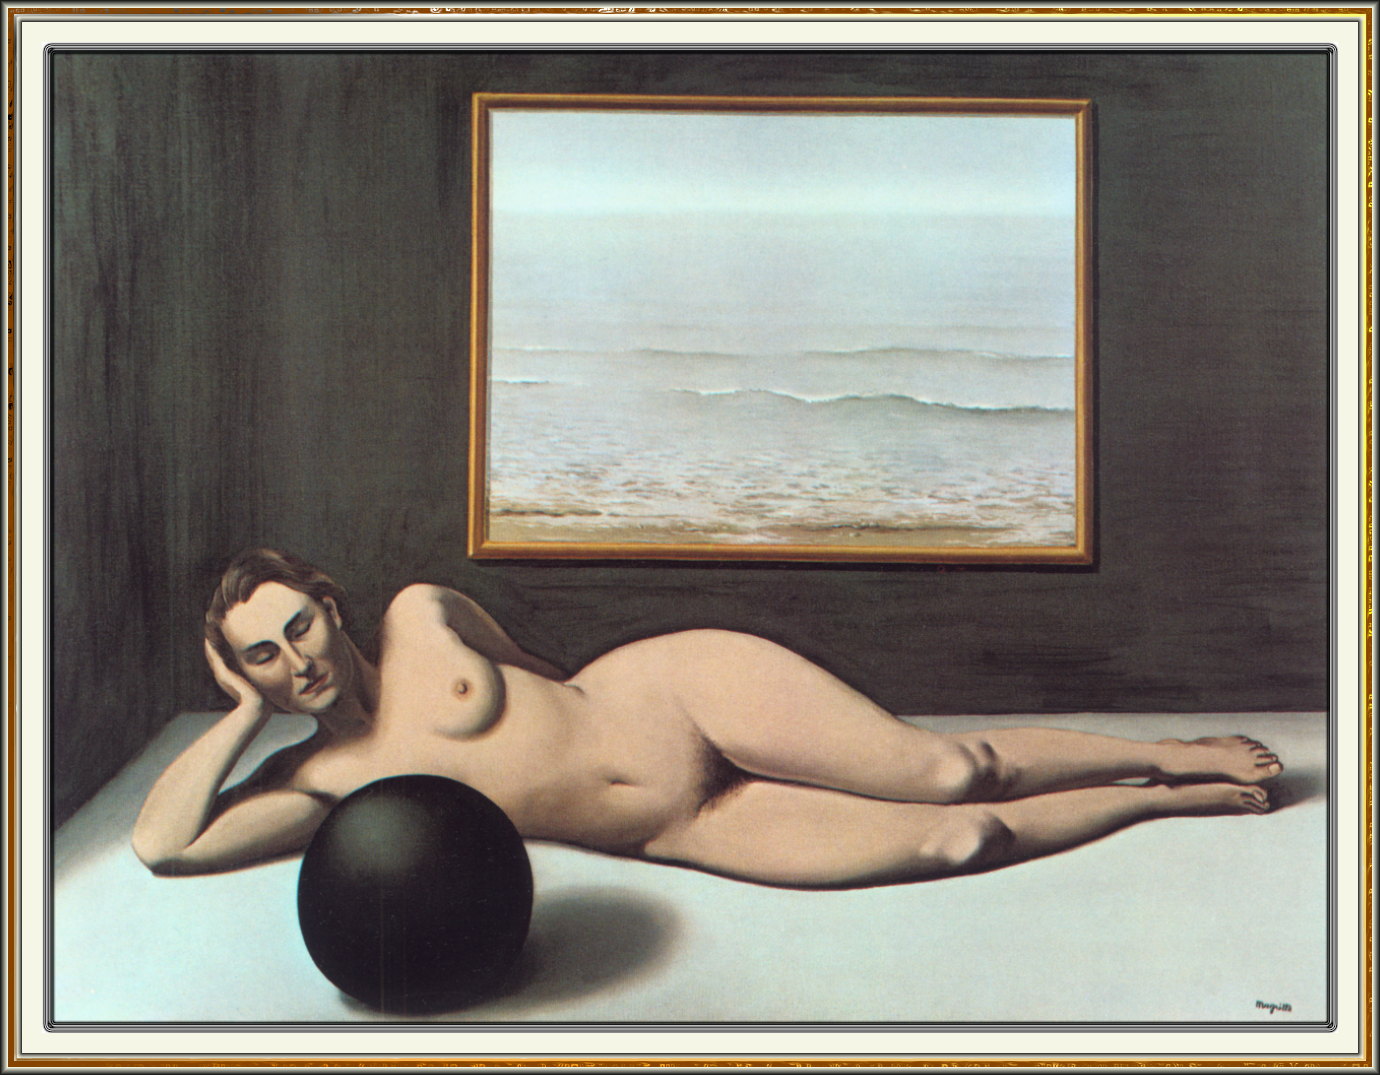 Bather between Light and Darkness (1935).